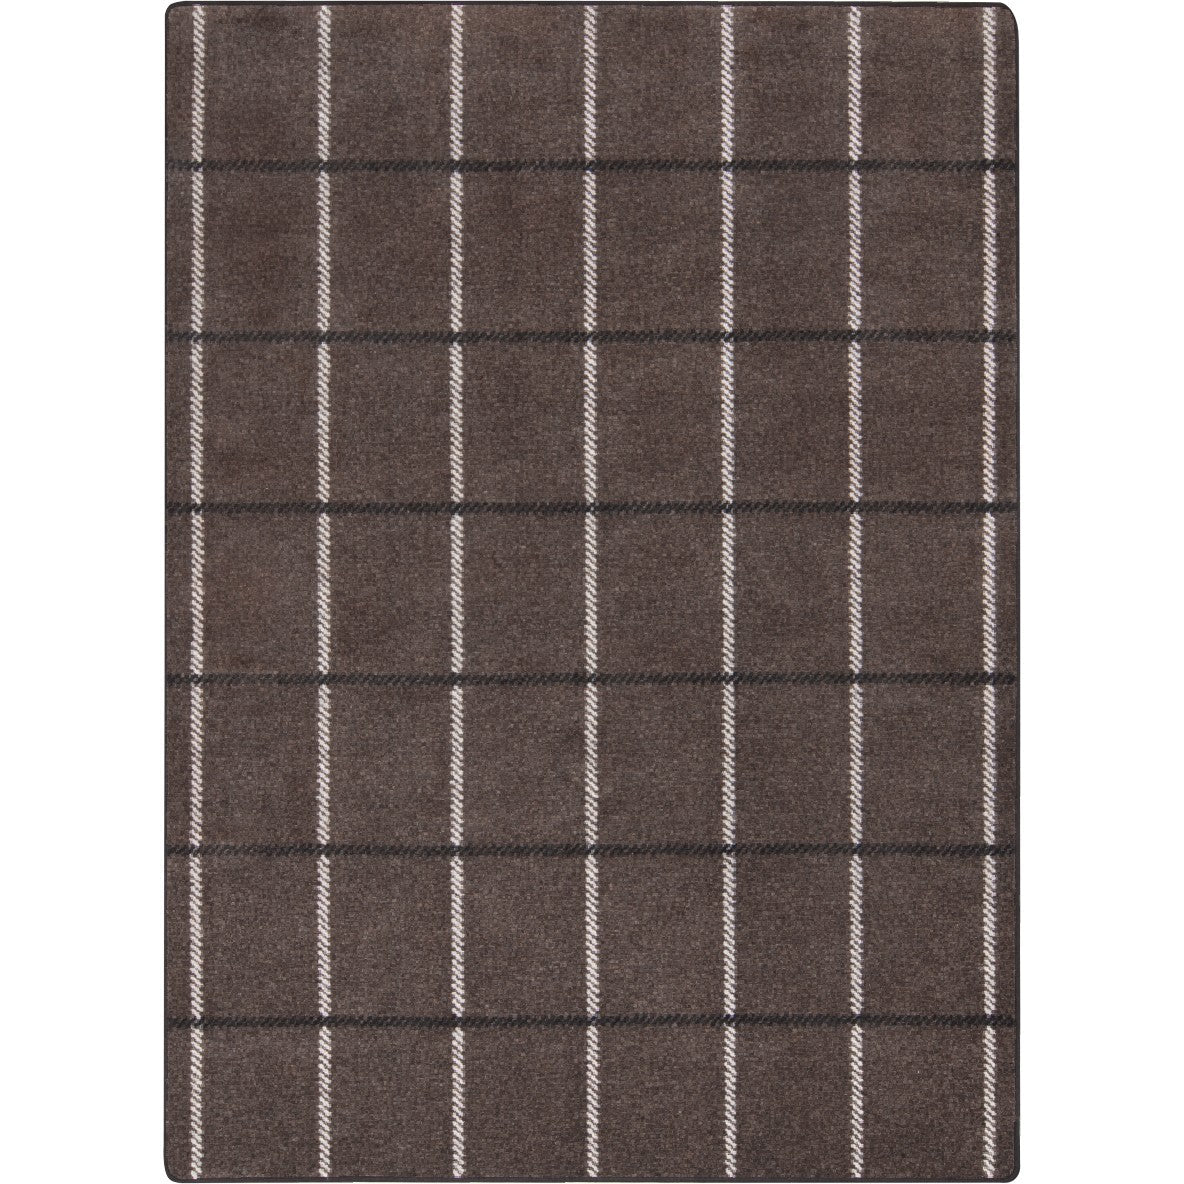 New Haven Impressions Collection Area Rug for Classrooms and Schools Libraries by Joy Carpets - SchoolOutlet